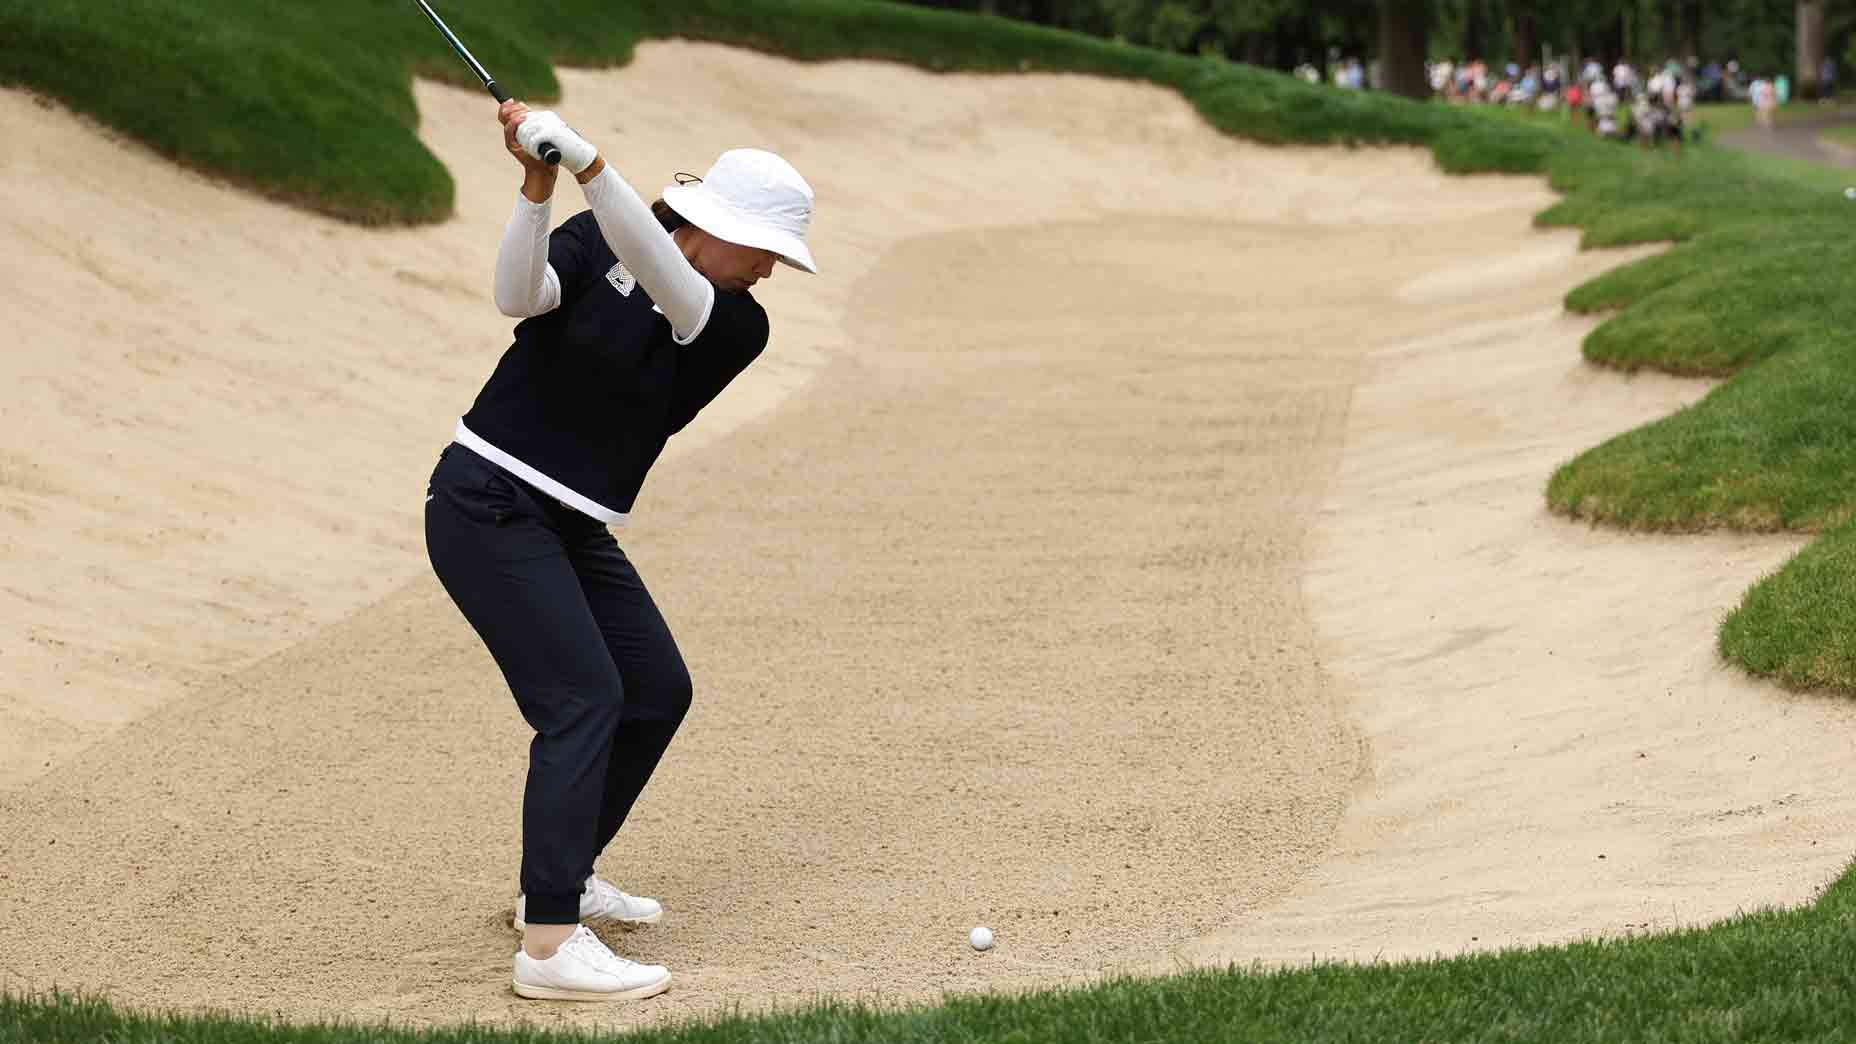 When you find yourself in a fairway bunker, use these 10 tips from GOLF Top 100 Teacher Kellie Stenzel for a swift recovery